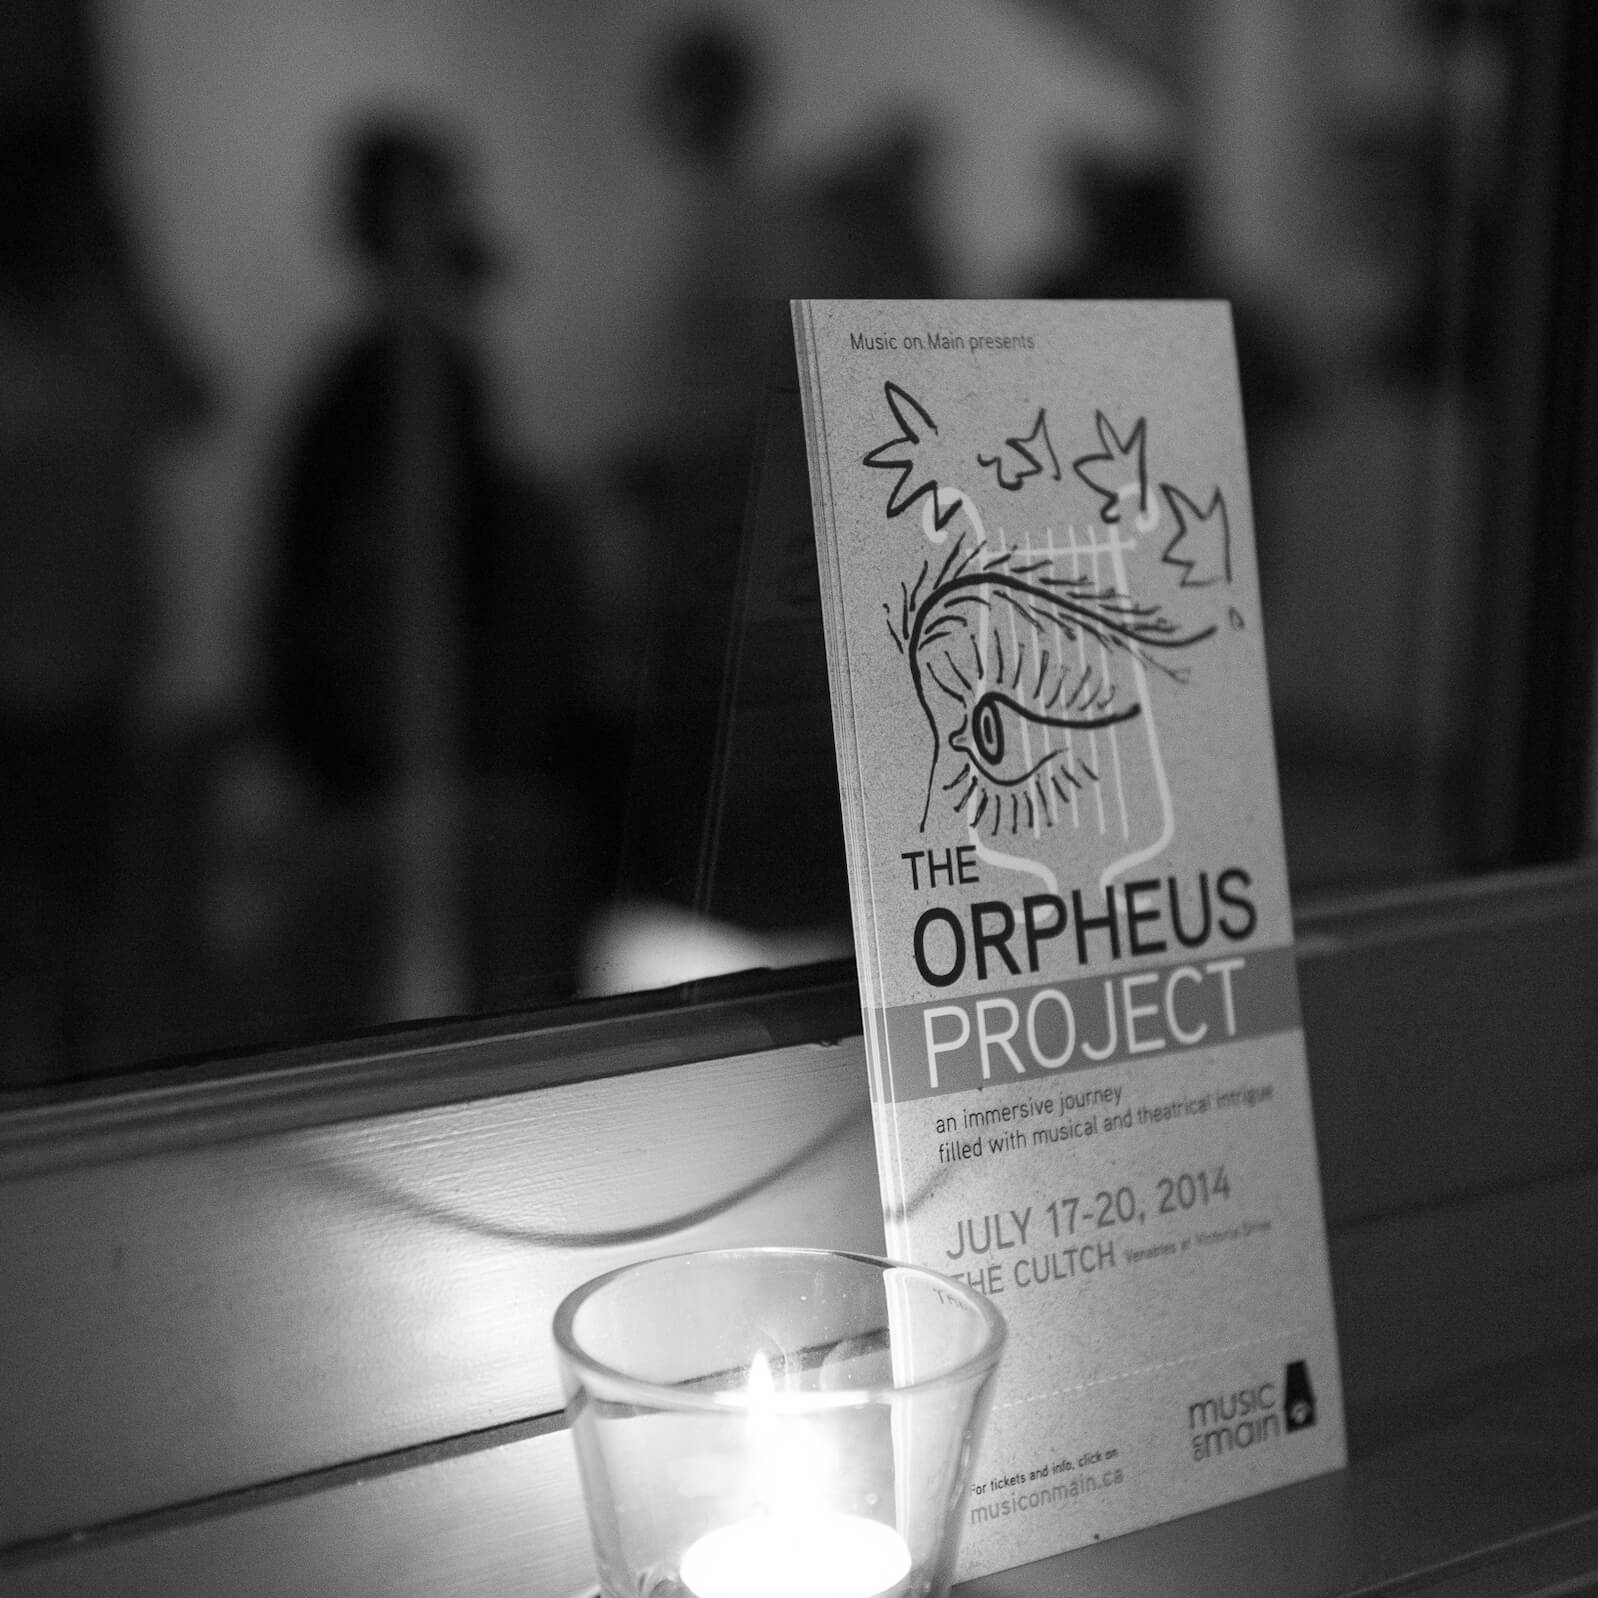 The Orpheus Project postcard leaning against a window with a candle beside it.